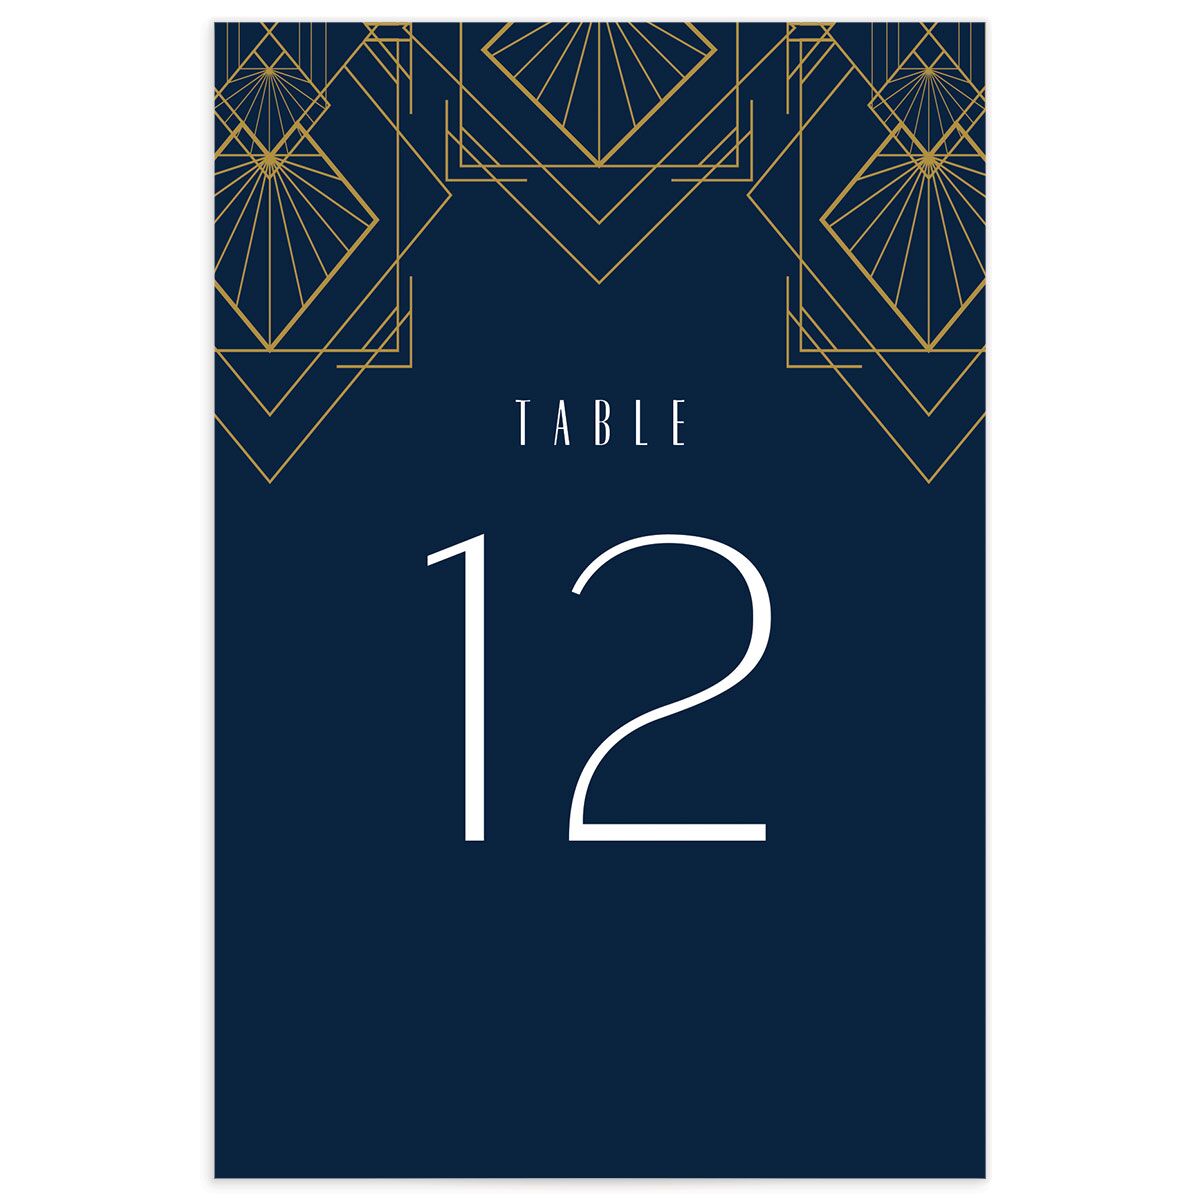 Formal Deco Table Numbers